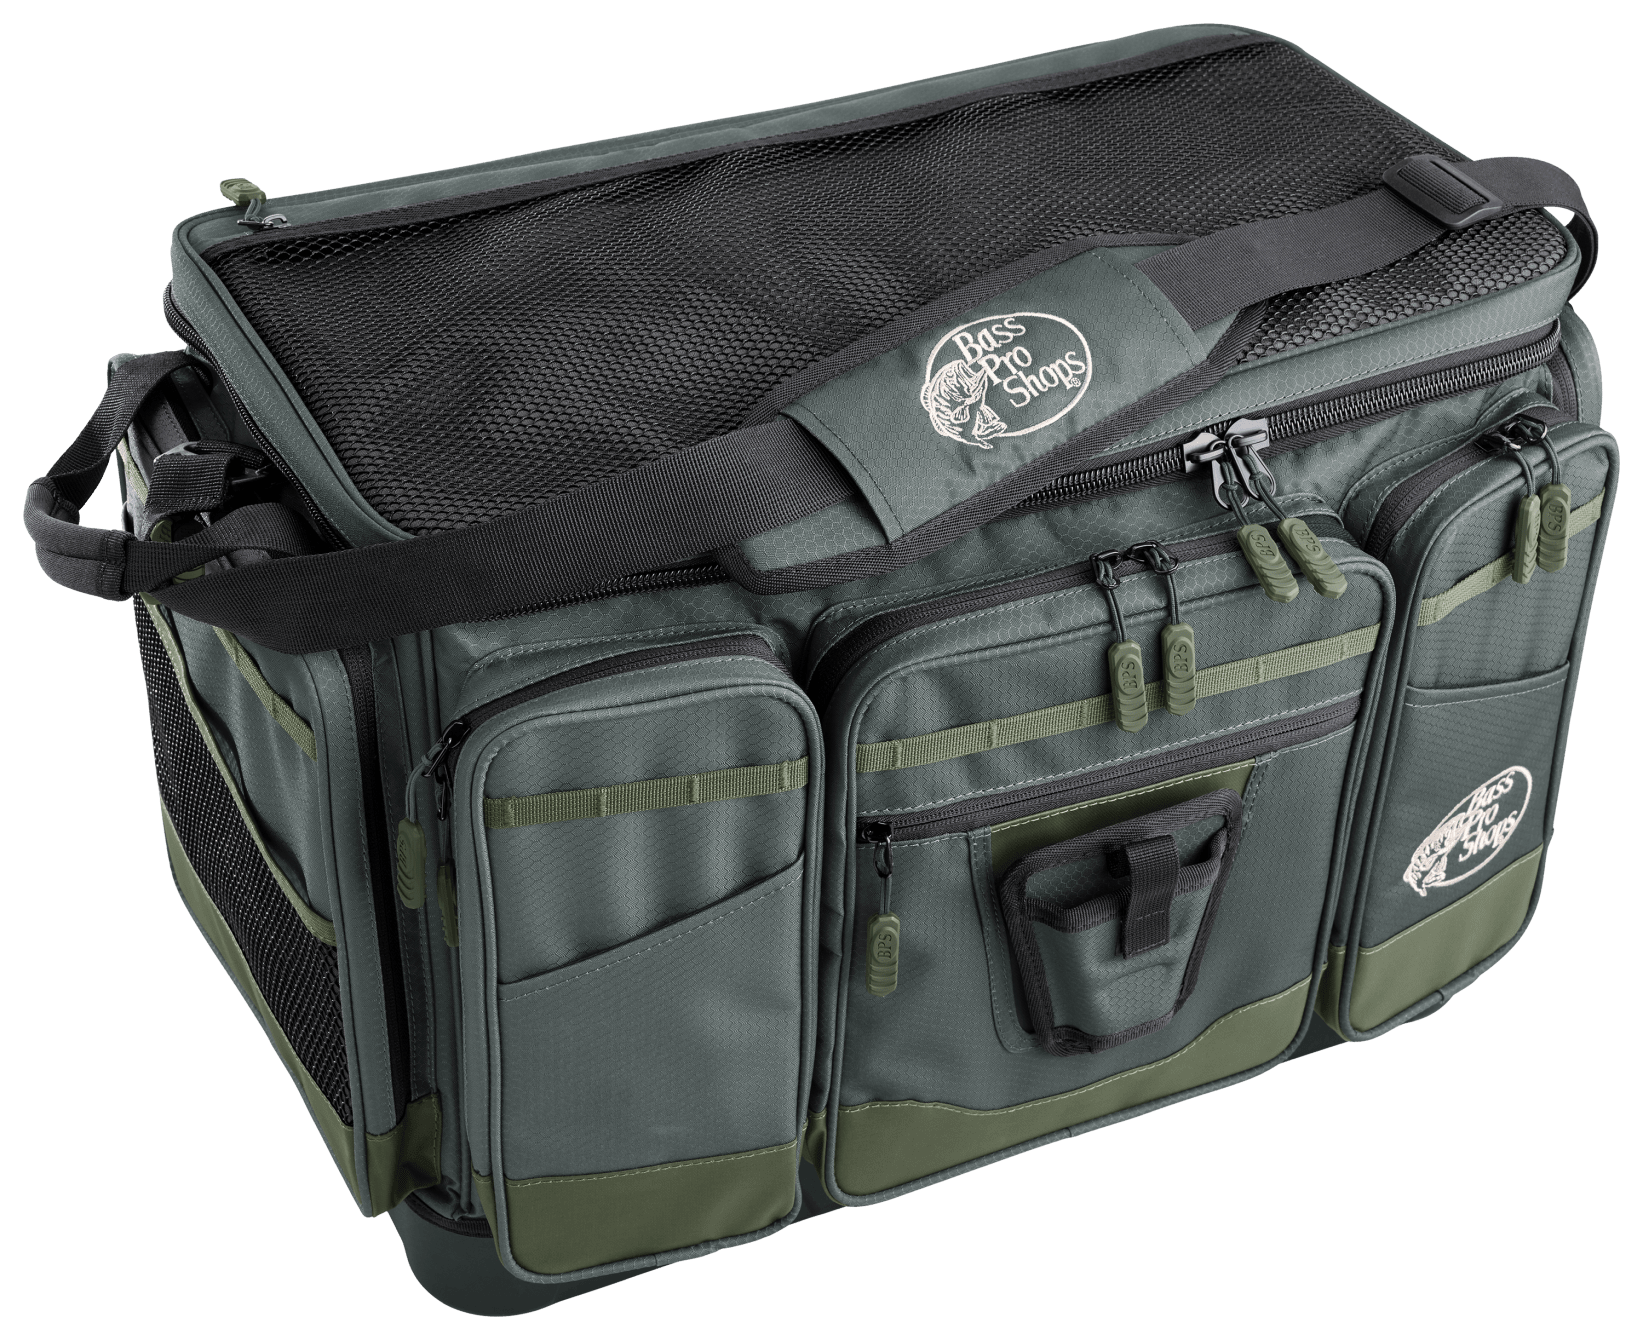 Bass Pro Shops Advanced Angler Pro Super Magnum 3700 Tackle System-Green - father's day gifts for grandfathers